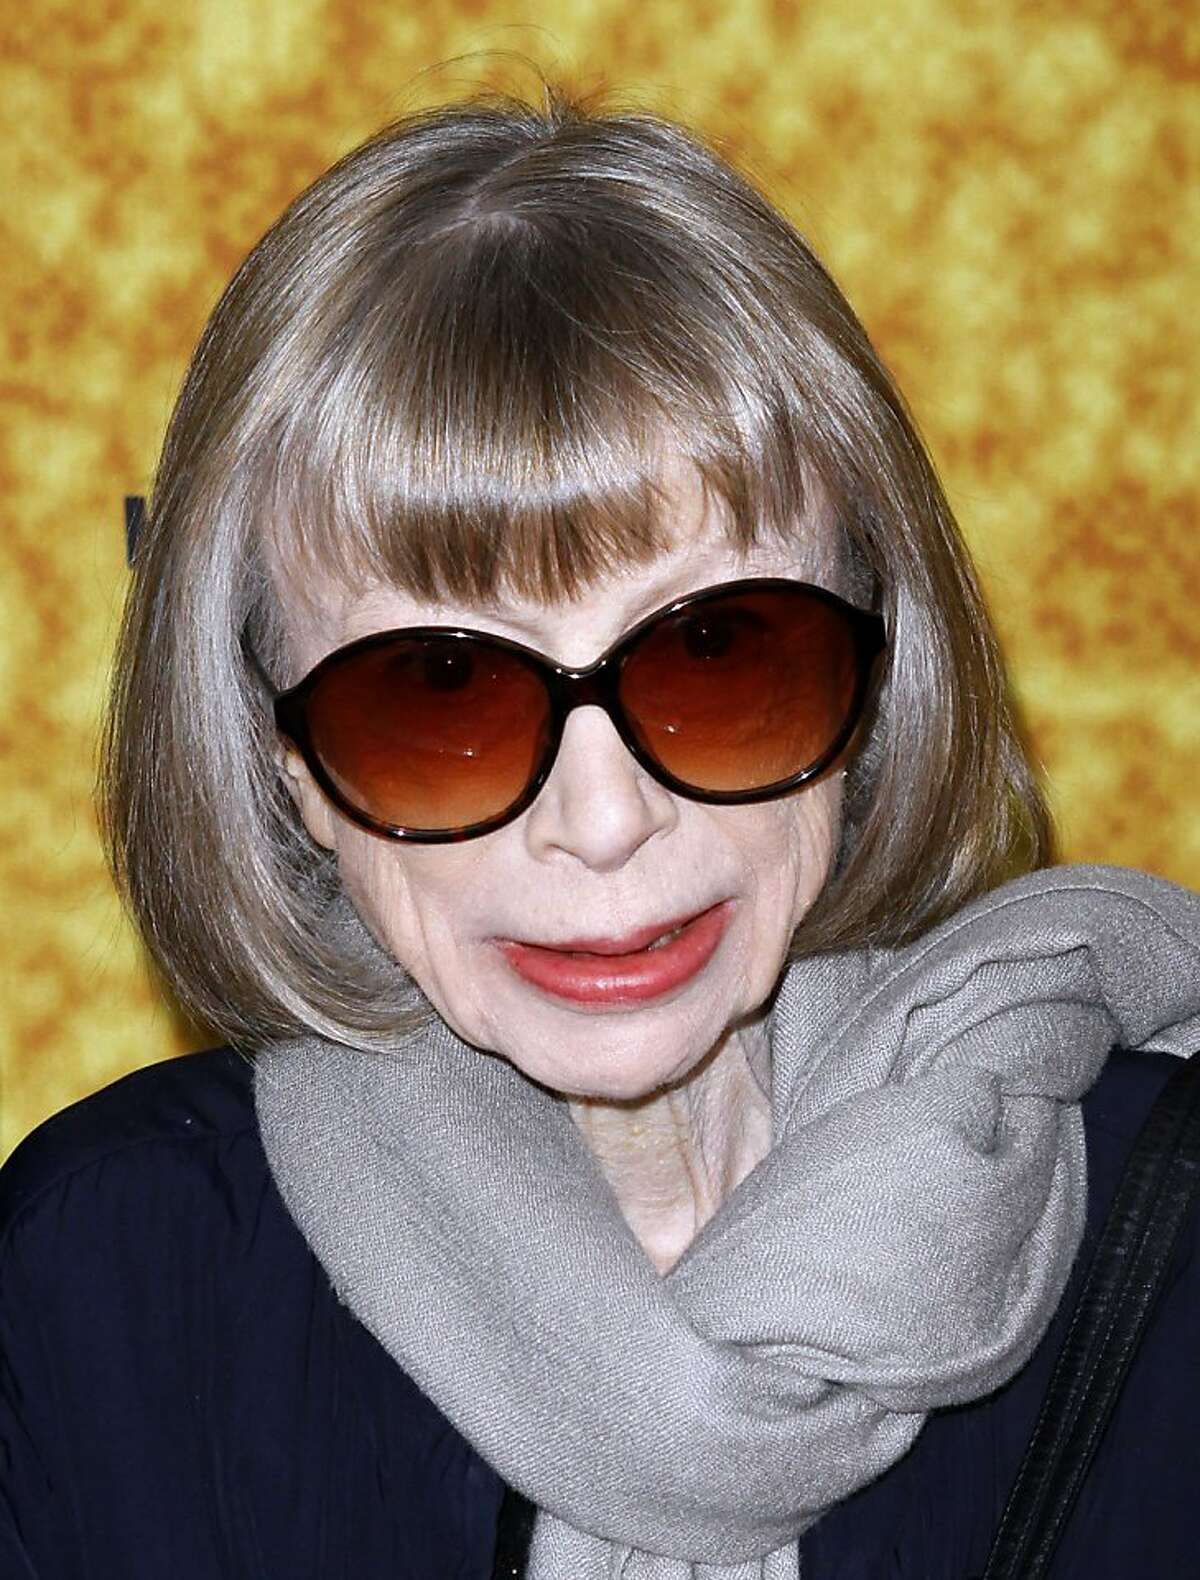 Joan Didion, shown at a premiere on October 6, 2011, has a new book "Blue Nights" ($25 from Alfred A. Knopf). (Donna Ward/Abaca Press/MCT)